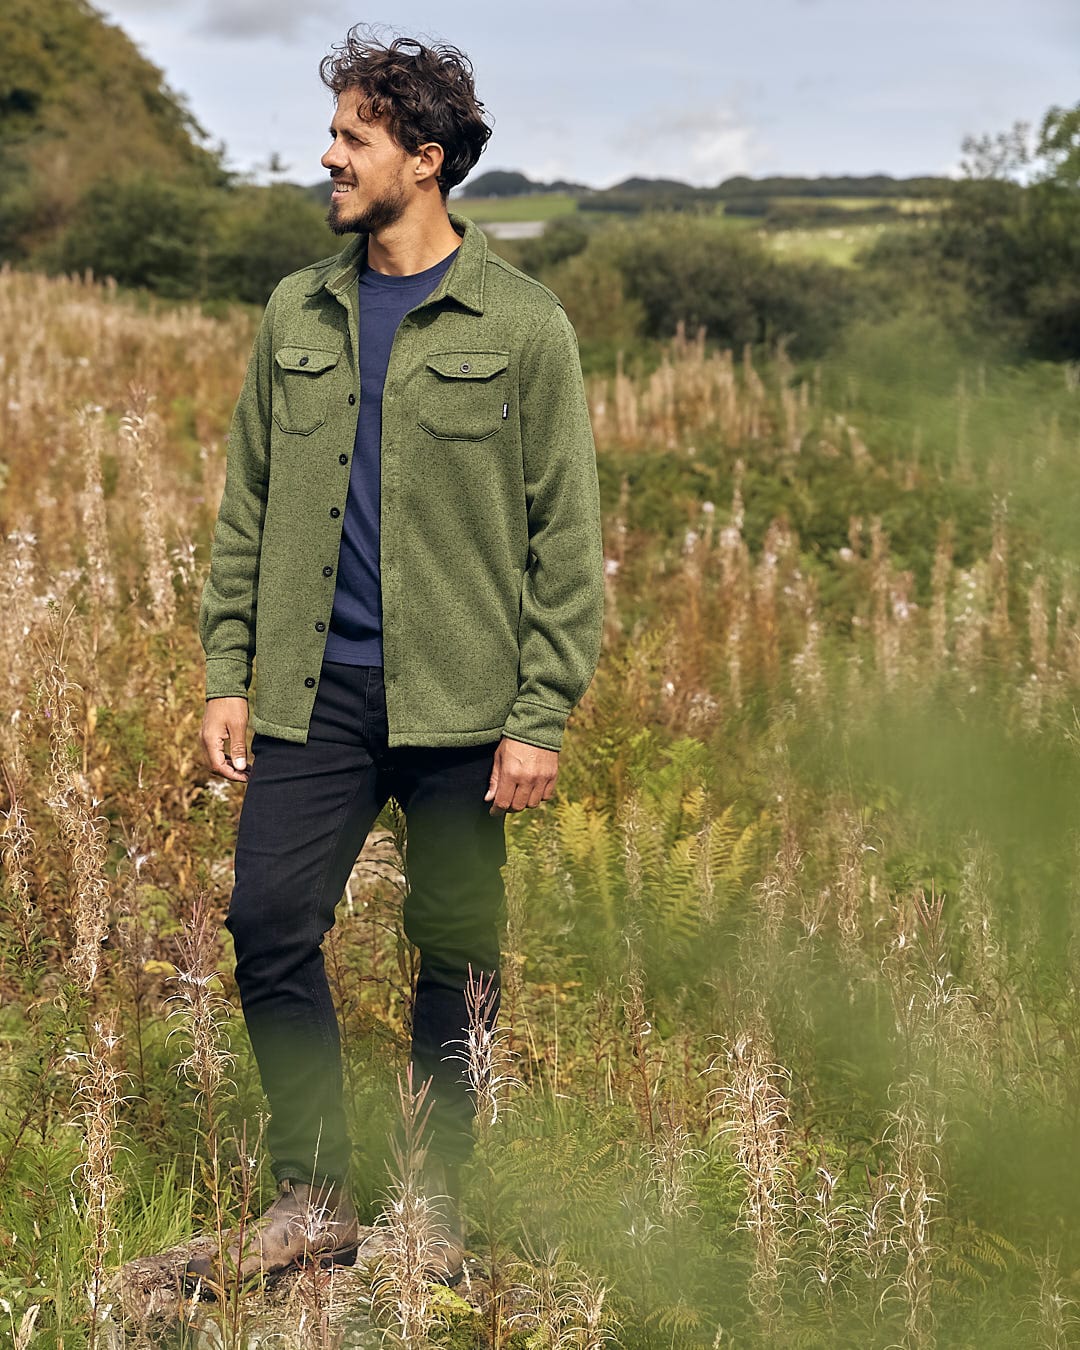 A man with a stylish look wearing a green jacket, featuring the Levick - Men's Long Sleeve Shirt and showcasing Saltrock branding, standing in field.